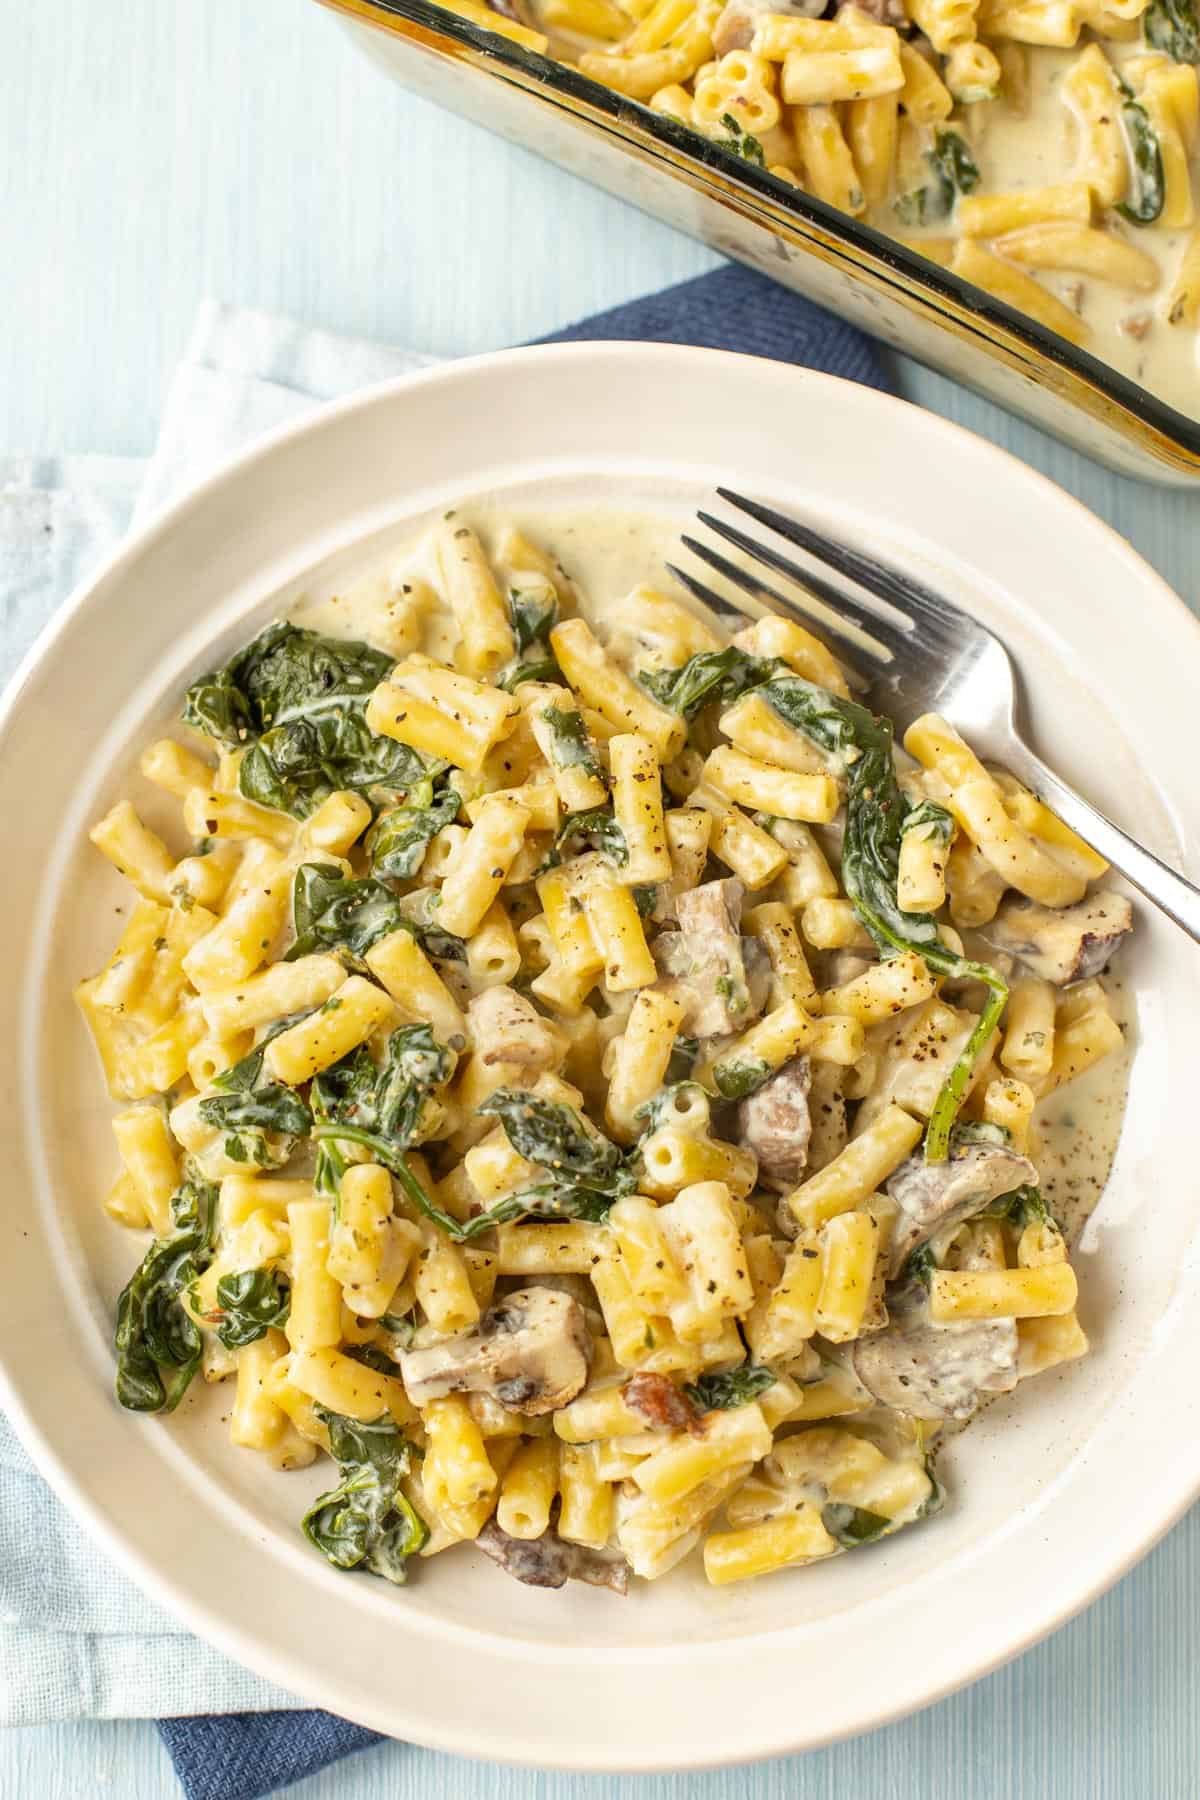 A bowlful of creamy Boursin pasta with mushrooms and spinach.